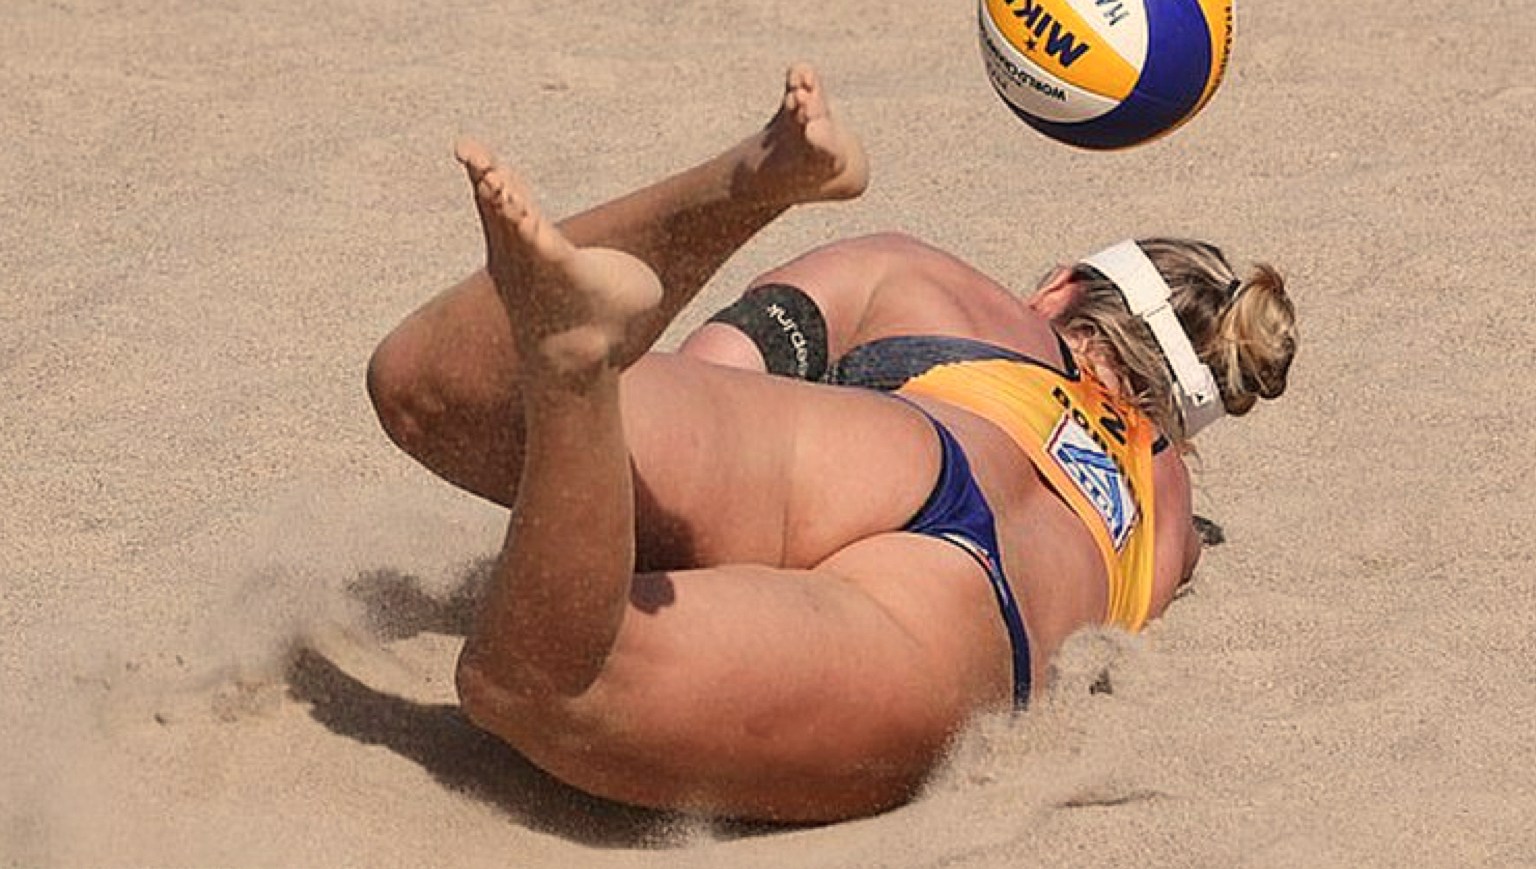 Topless Girl Beach Volleyball - Fucked a Volley Ball Player on the Beach (64 photos) - motherless porn pics